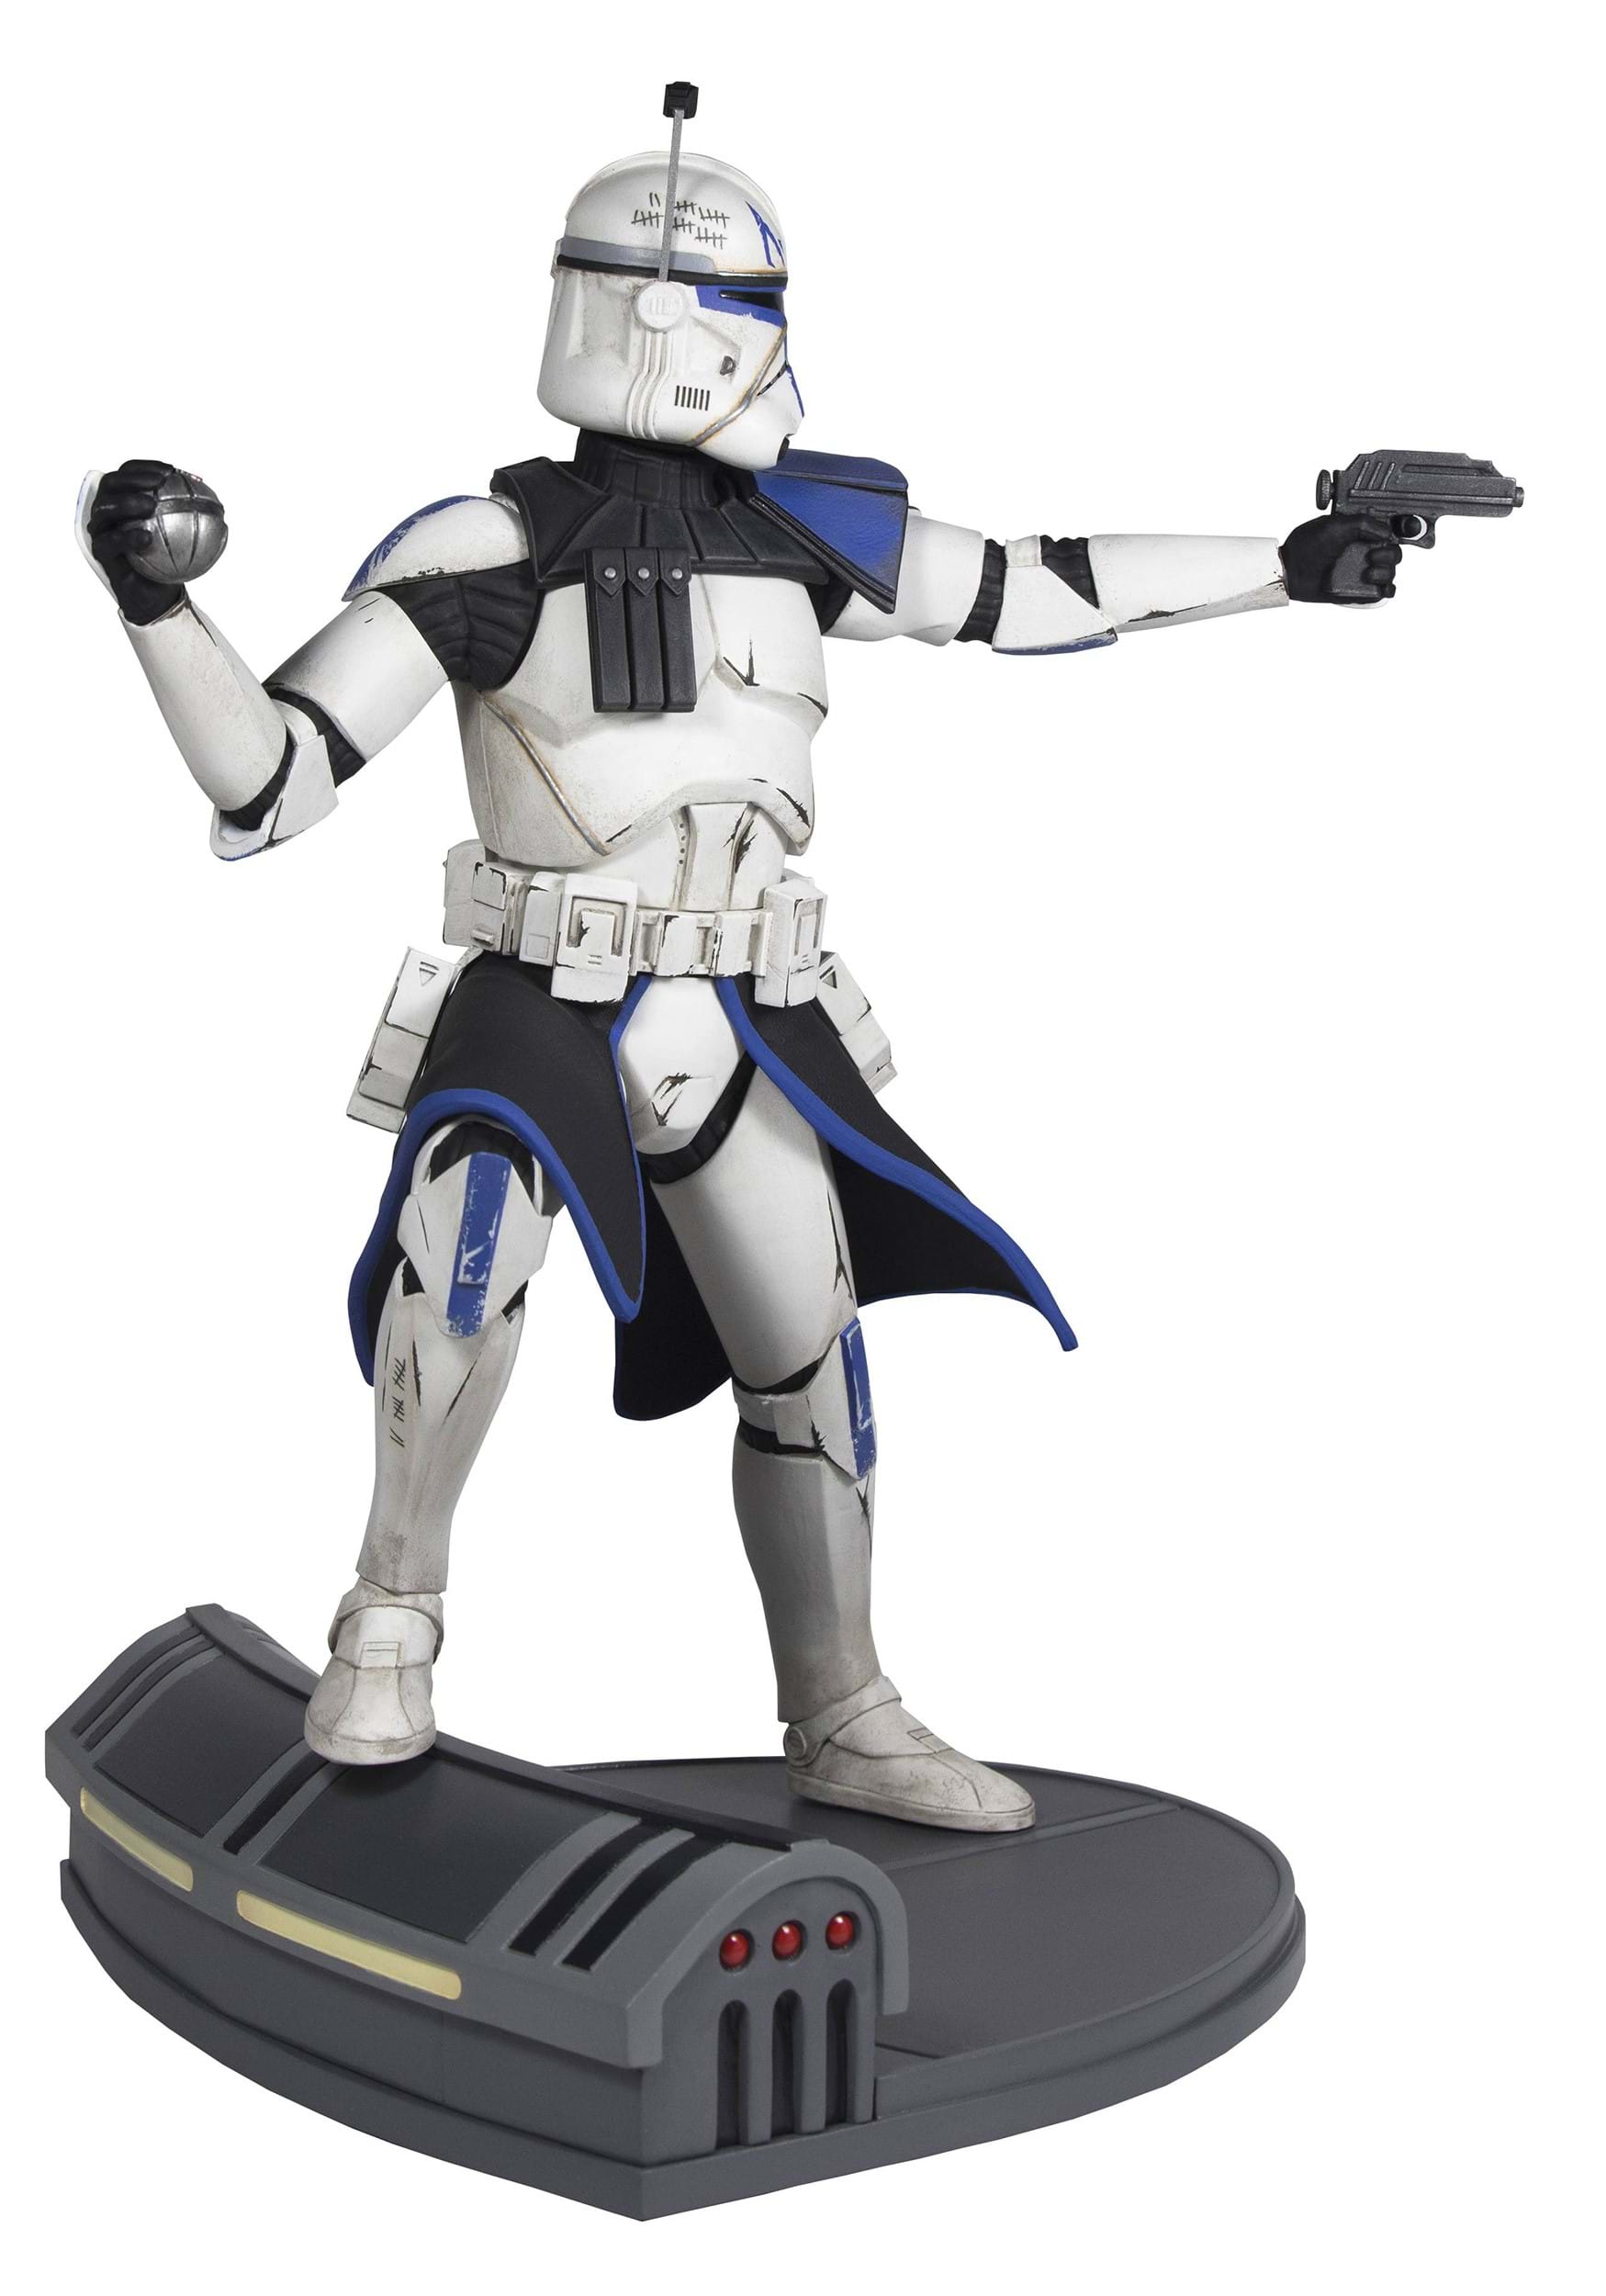 Image of Diamond Comics Star Wars Rex Statue Premier Collection from Clone Wars